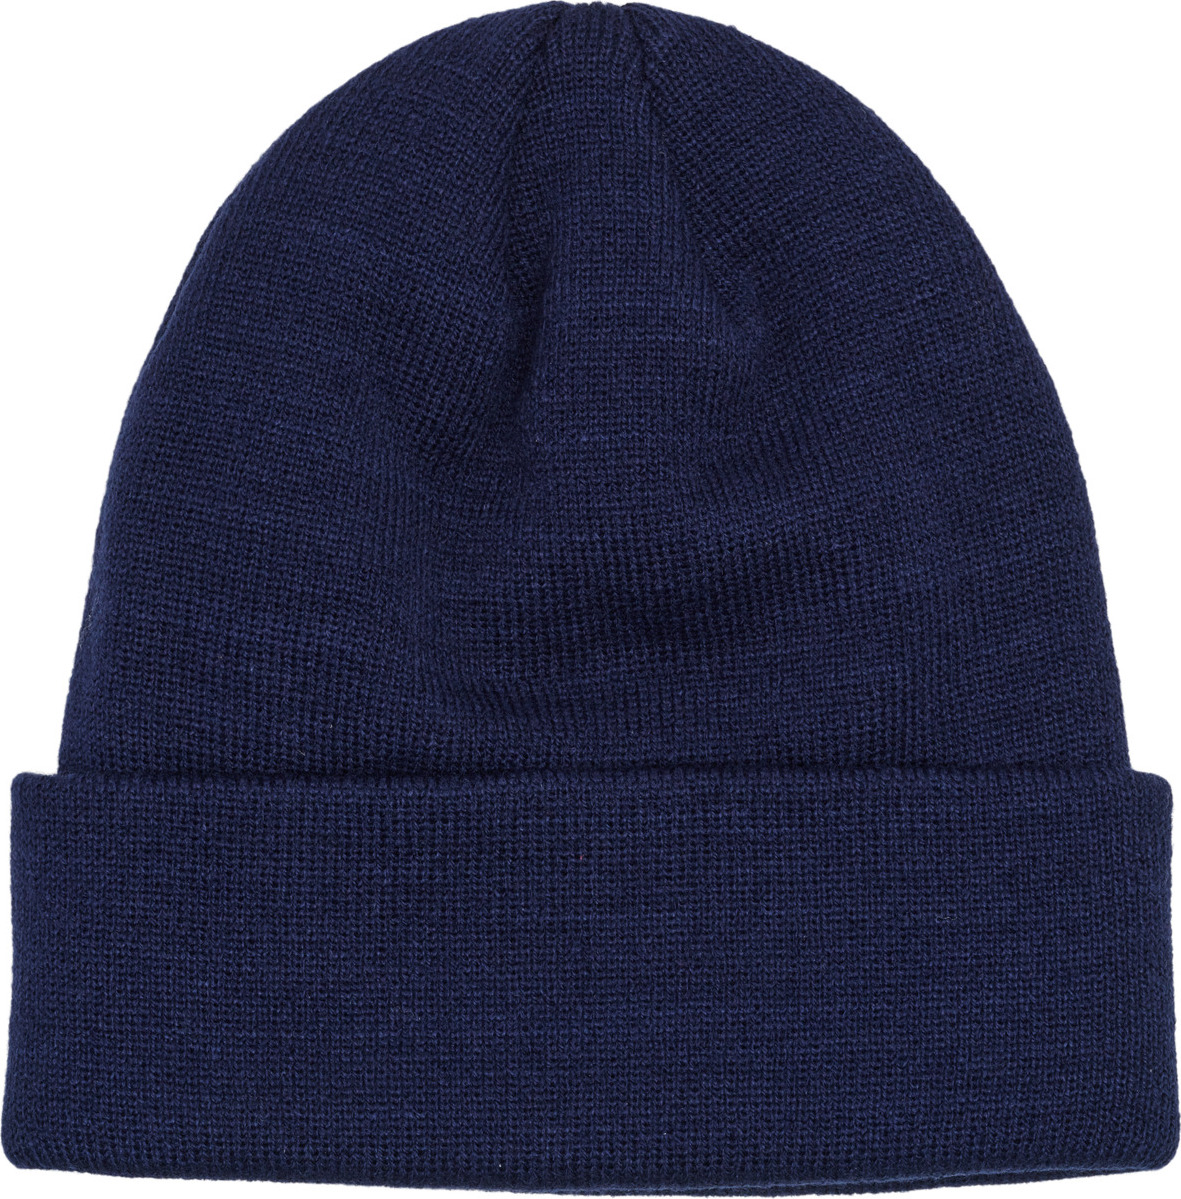 hmlLEGACY Core Beanie Peacoat | Buy hmlLEGACY Core Beanie Peacoat here |  Outnorth